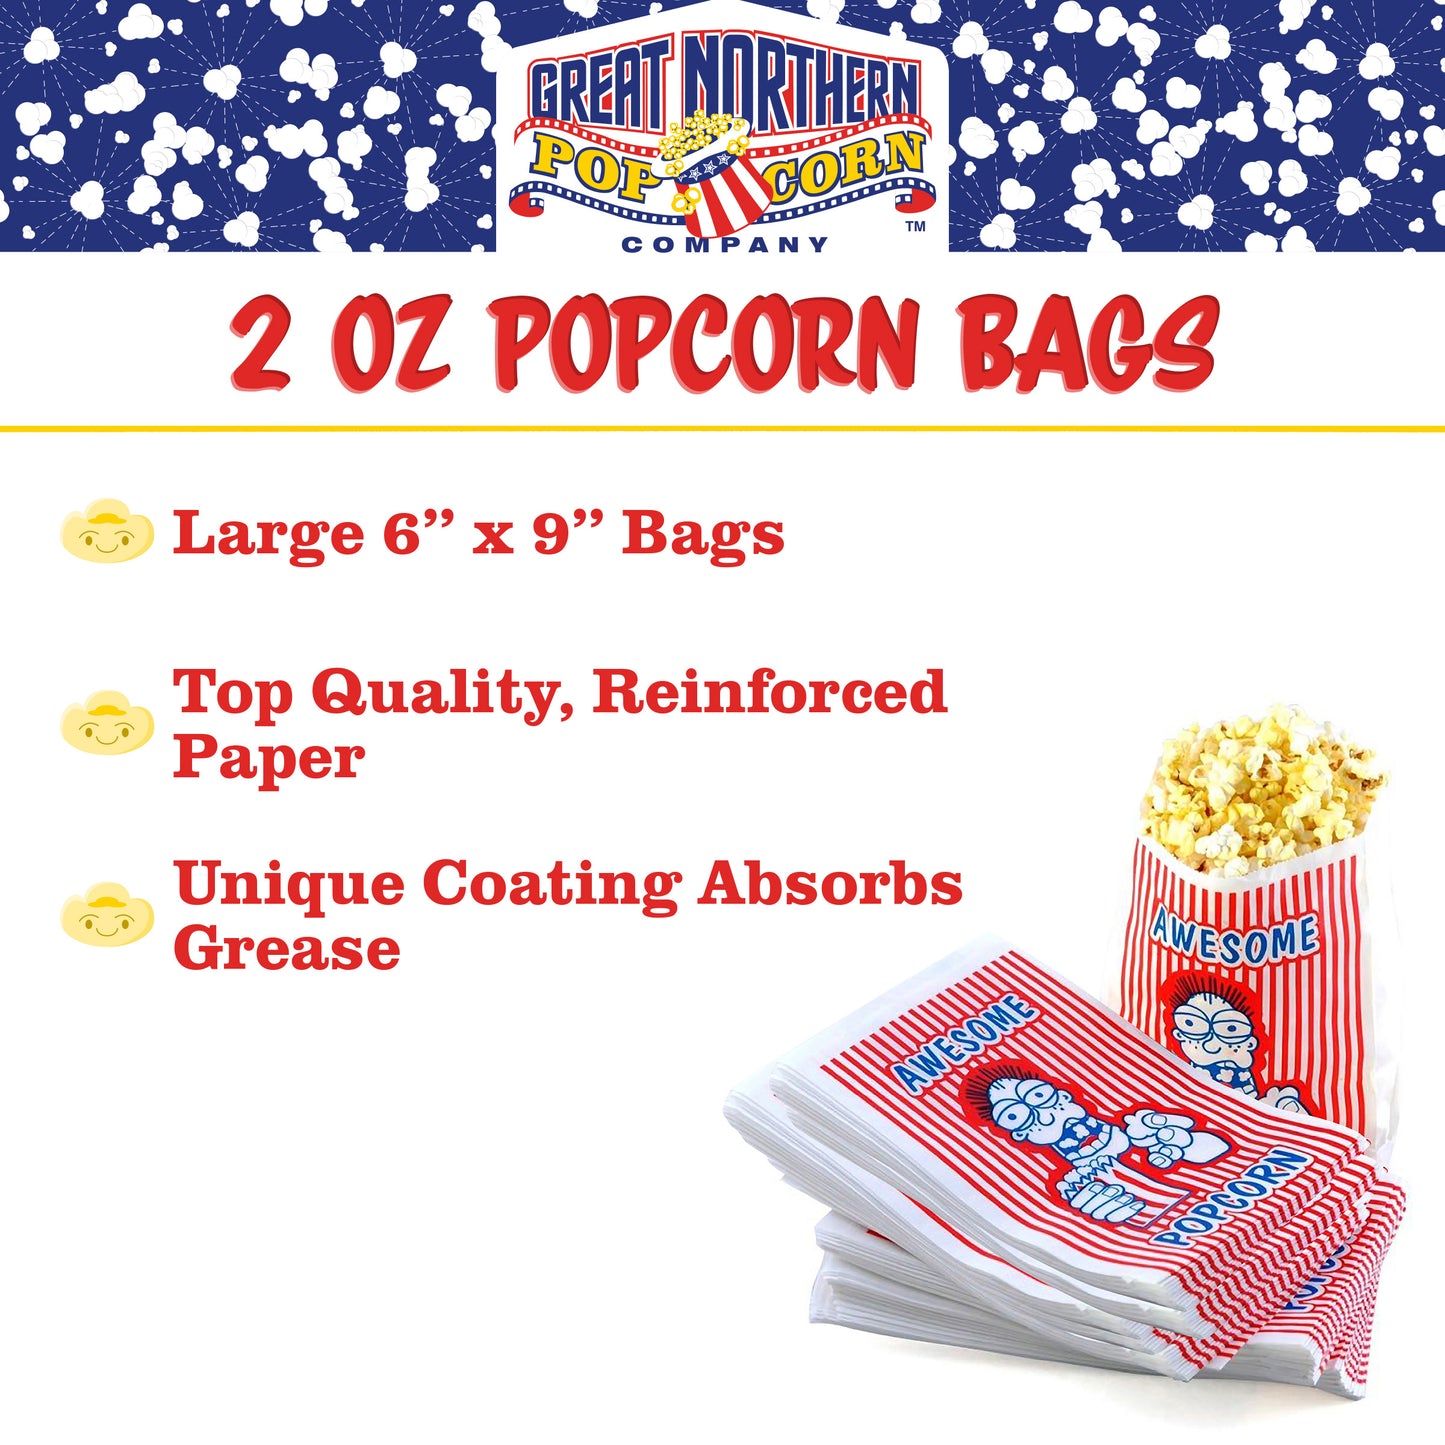 100 Popcorn Bags and 4 Ounce All-in-One Popcorn Packs  – Case of 12